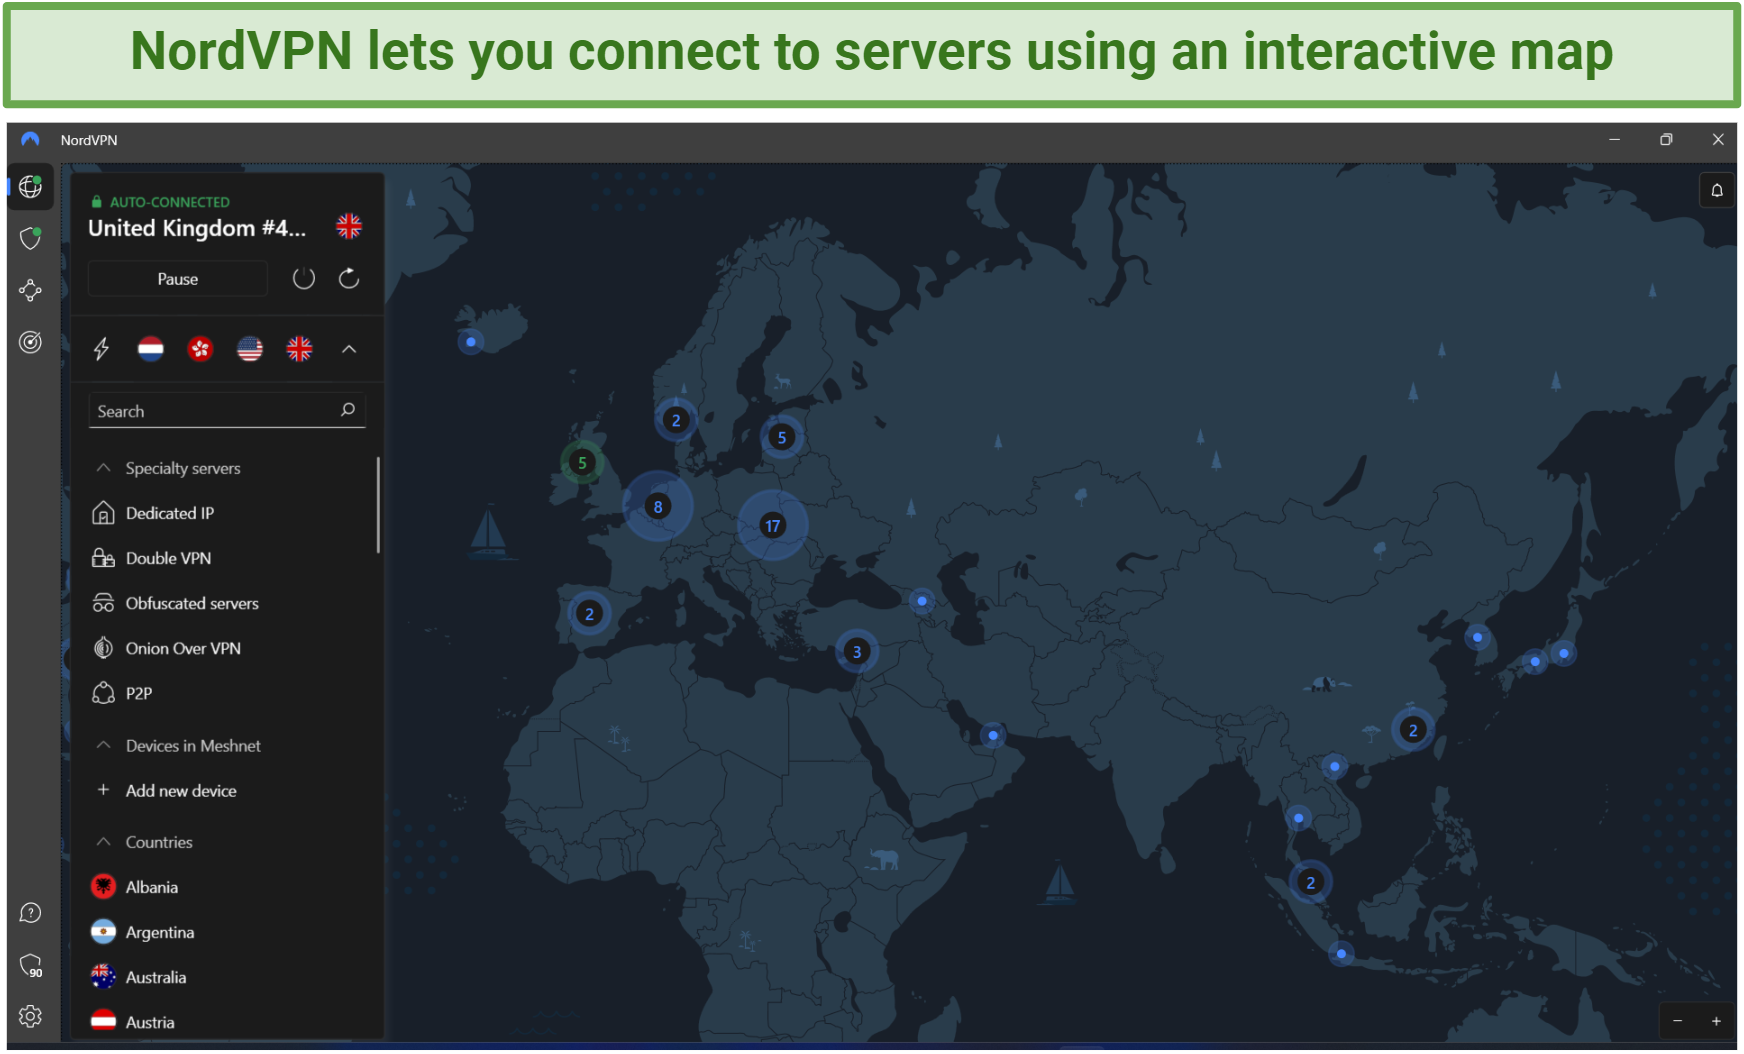 Screenshot of NordVPN's user interface showing the server select map.